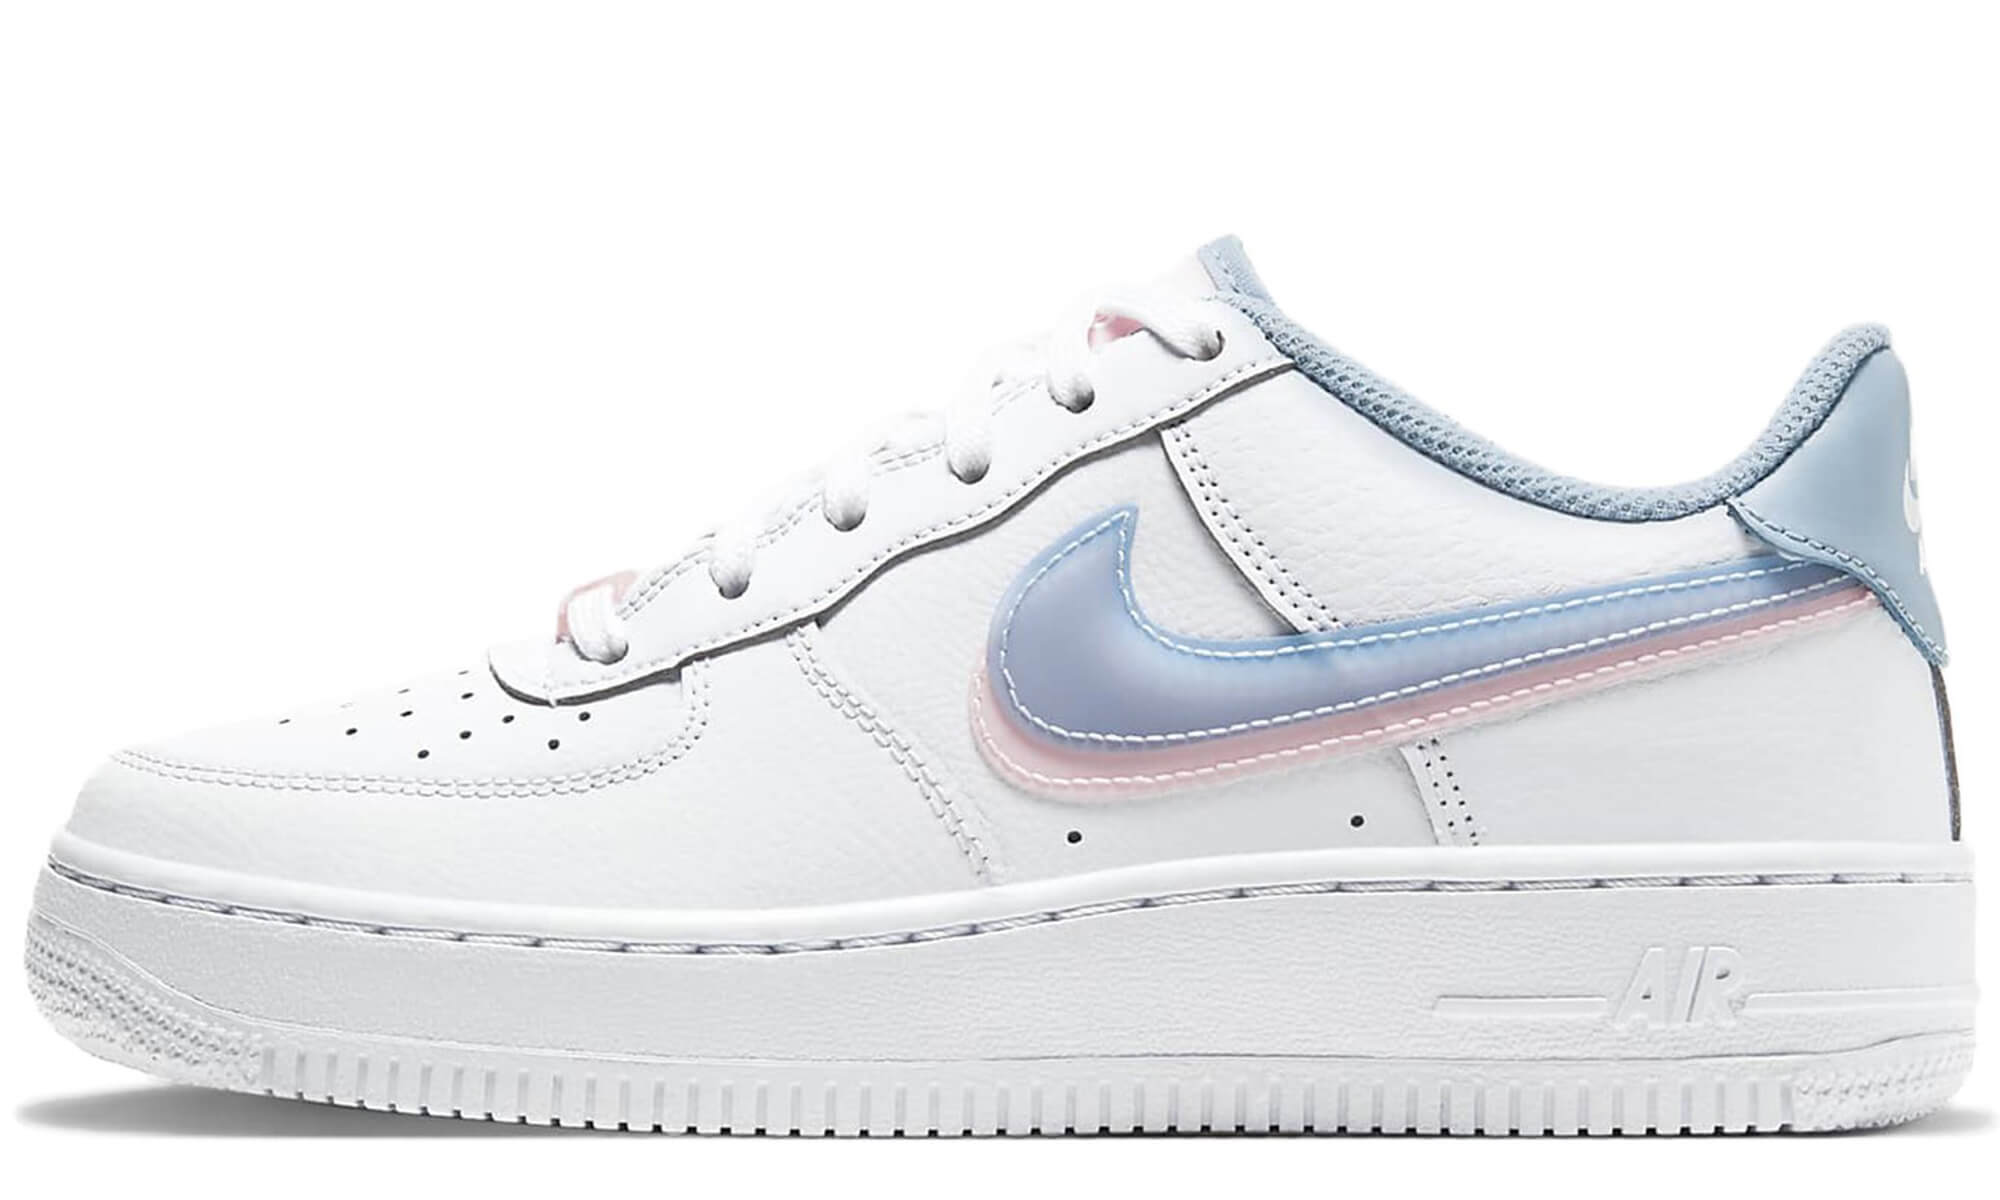 Nike Air Force 1 Low '07 LV8 Double Swoosh White Metallic Gold (GS)